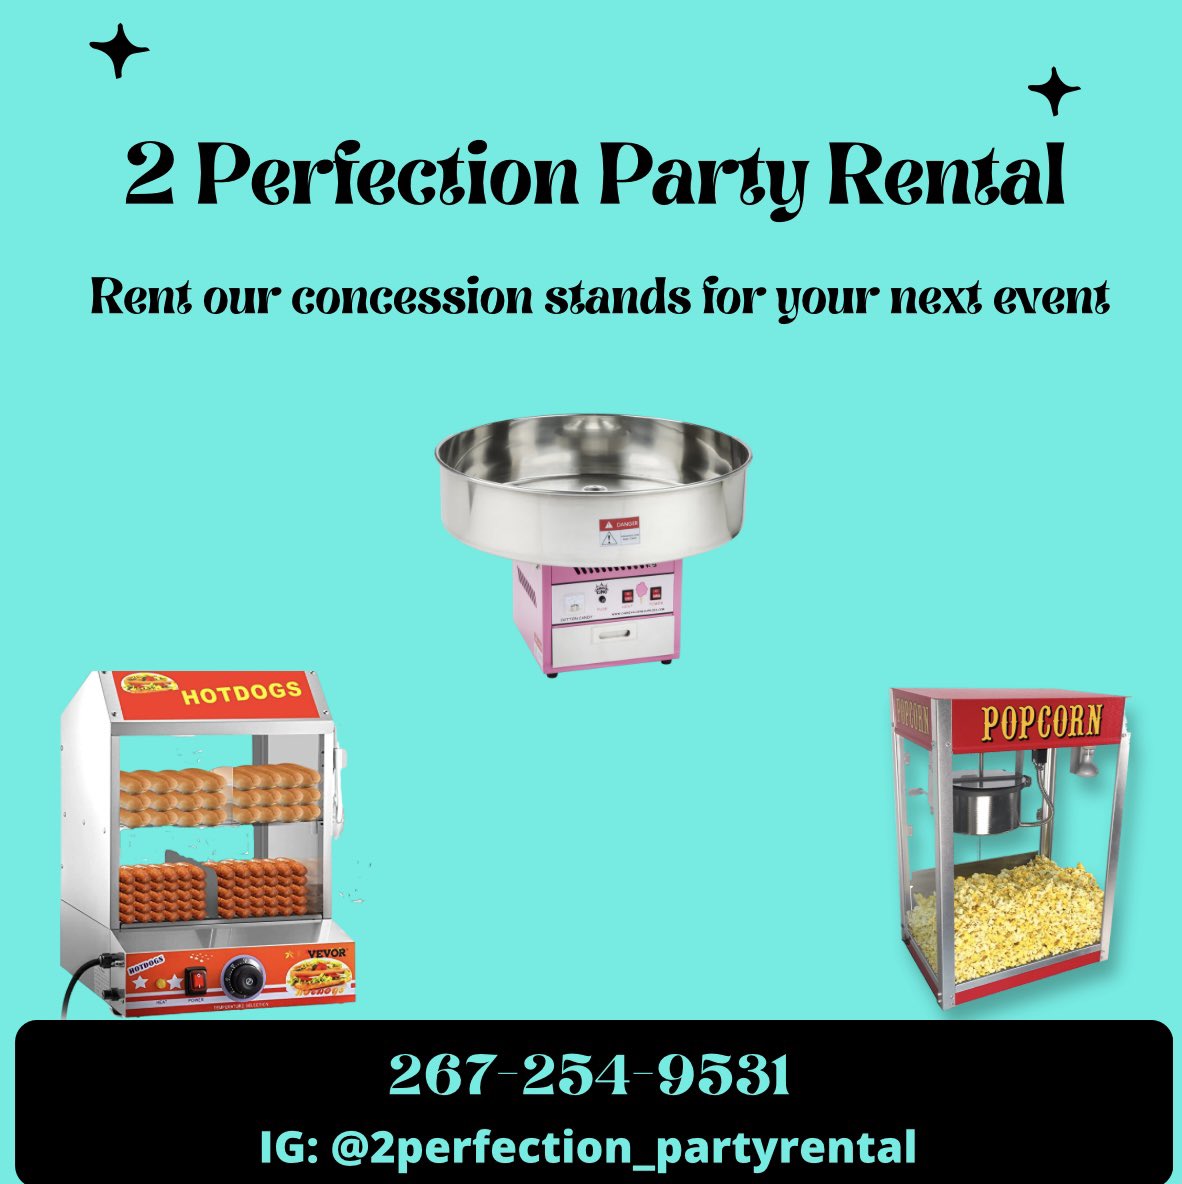 Rent our concession stands for your upcoming events  #partyrental #cottoncandy #popcorn #hotdog #entertainment #birthdayparty #kidsparties #events #familyreunion #cookout #bookwithme #philly #nj #de